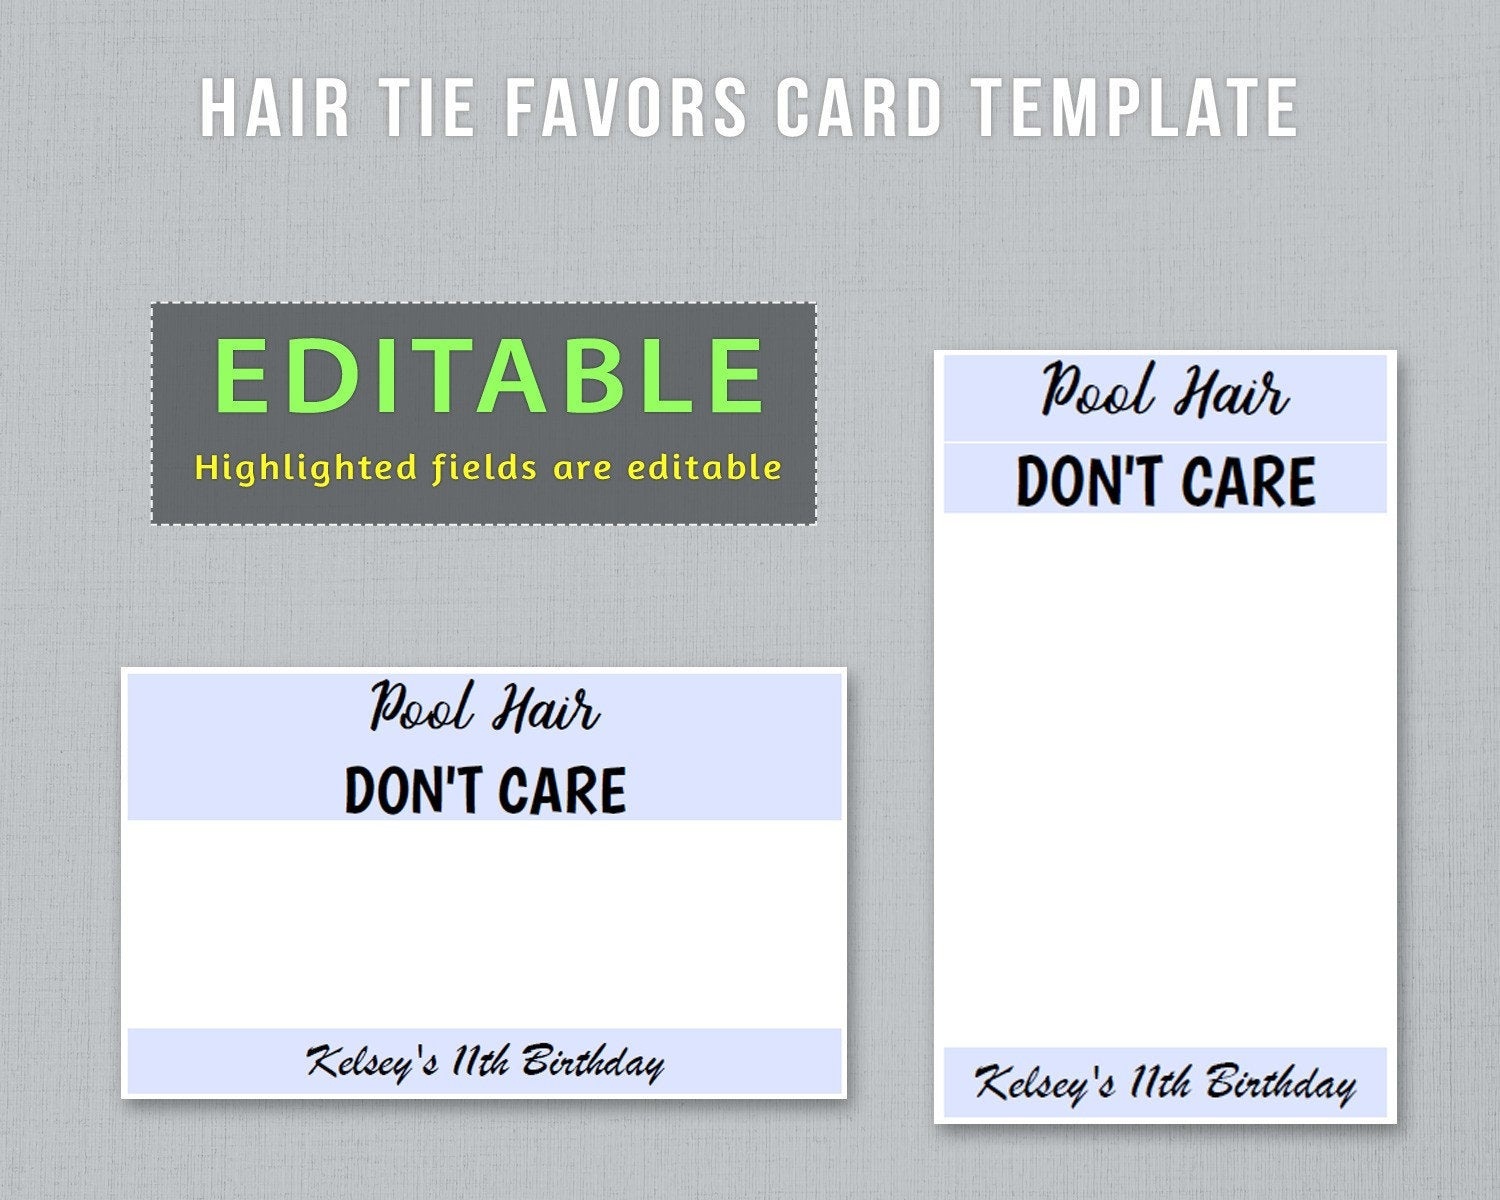 Editable Hair Tie Favors Card Template To Have And To Hold | Etsy - To Have And To Hold Your Hair Back Free Printable